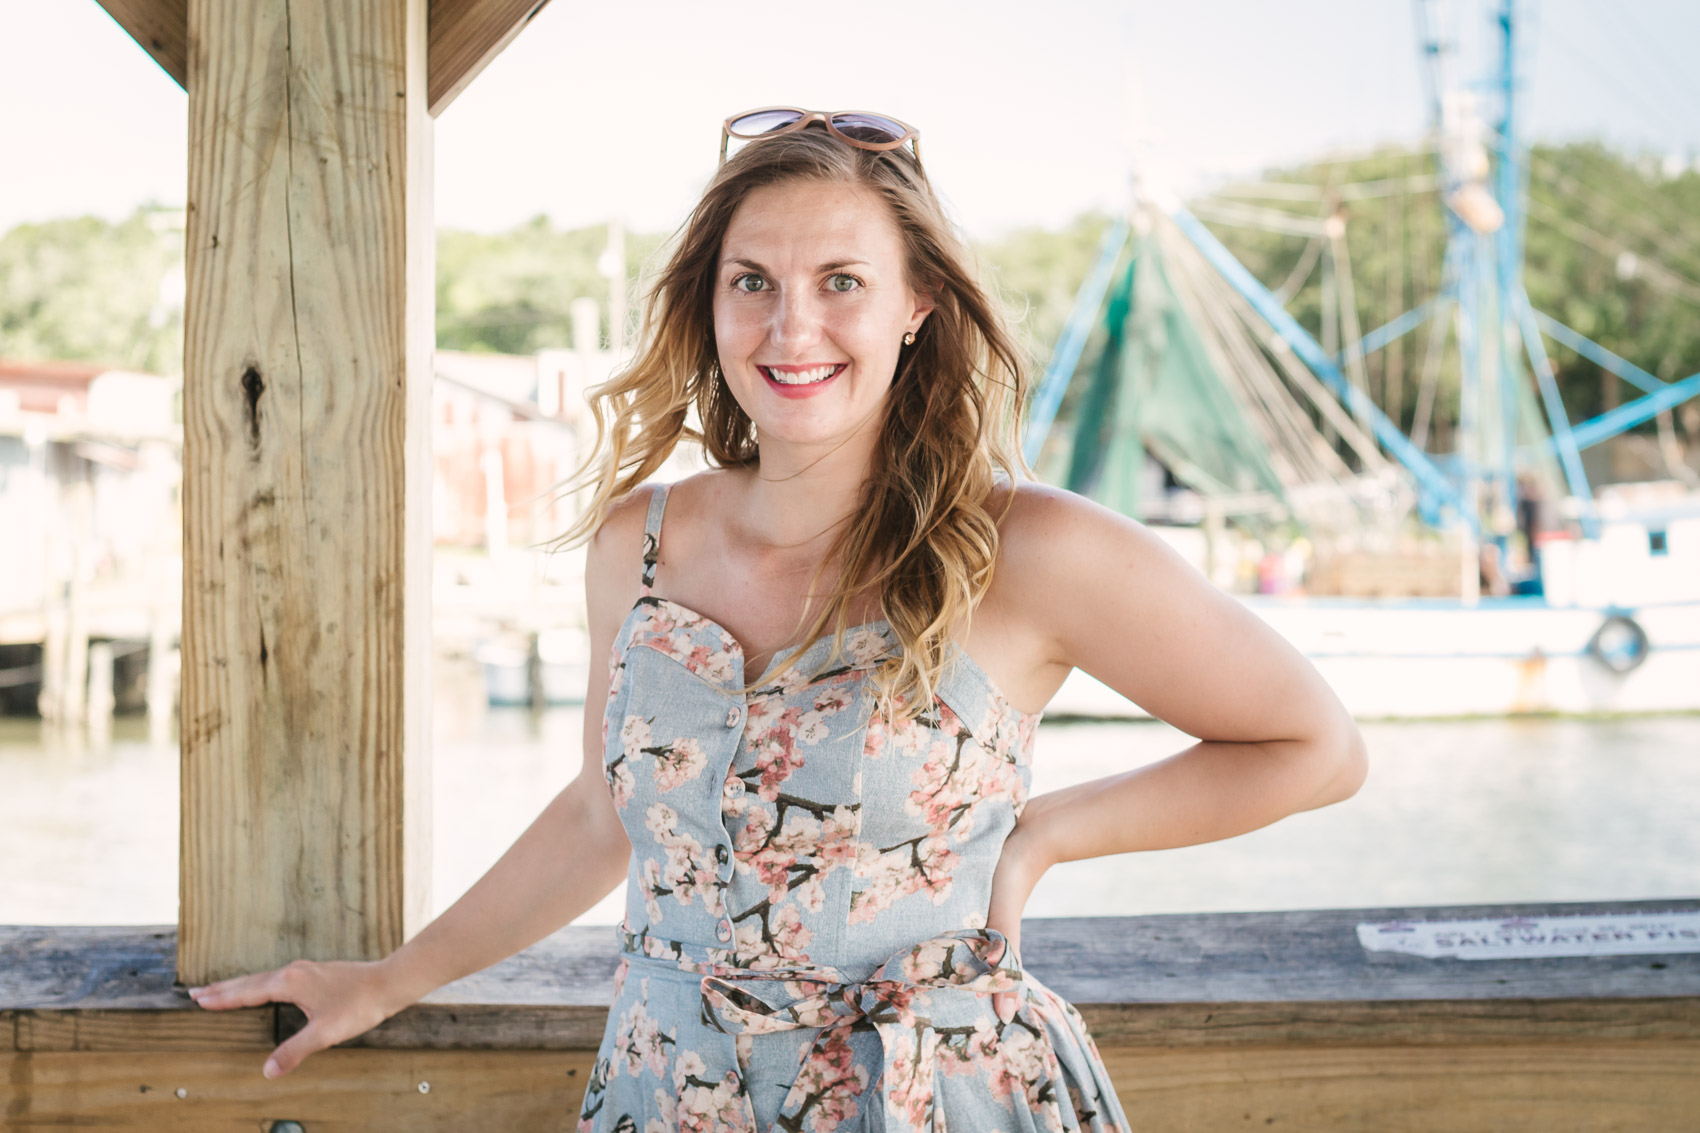 Things to Do in Mount Pleasant, SC: Dolphin Spotting at Shem Creek Park | Wearing the Gal Meets Glam Collection cherry blossom print Daphne dress